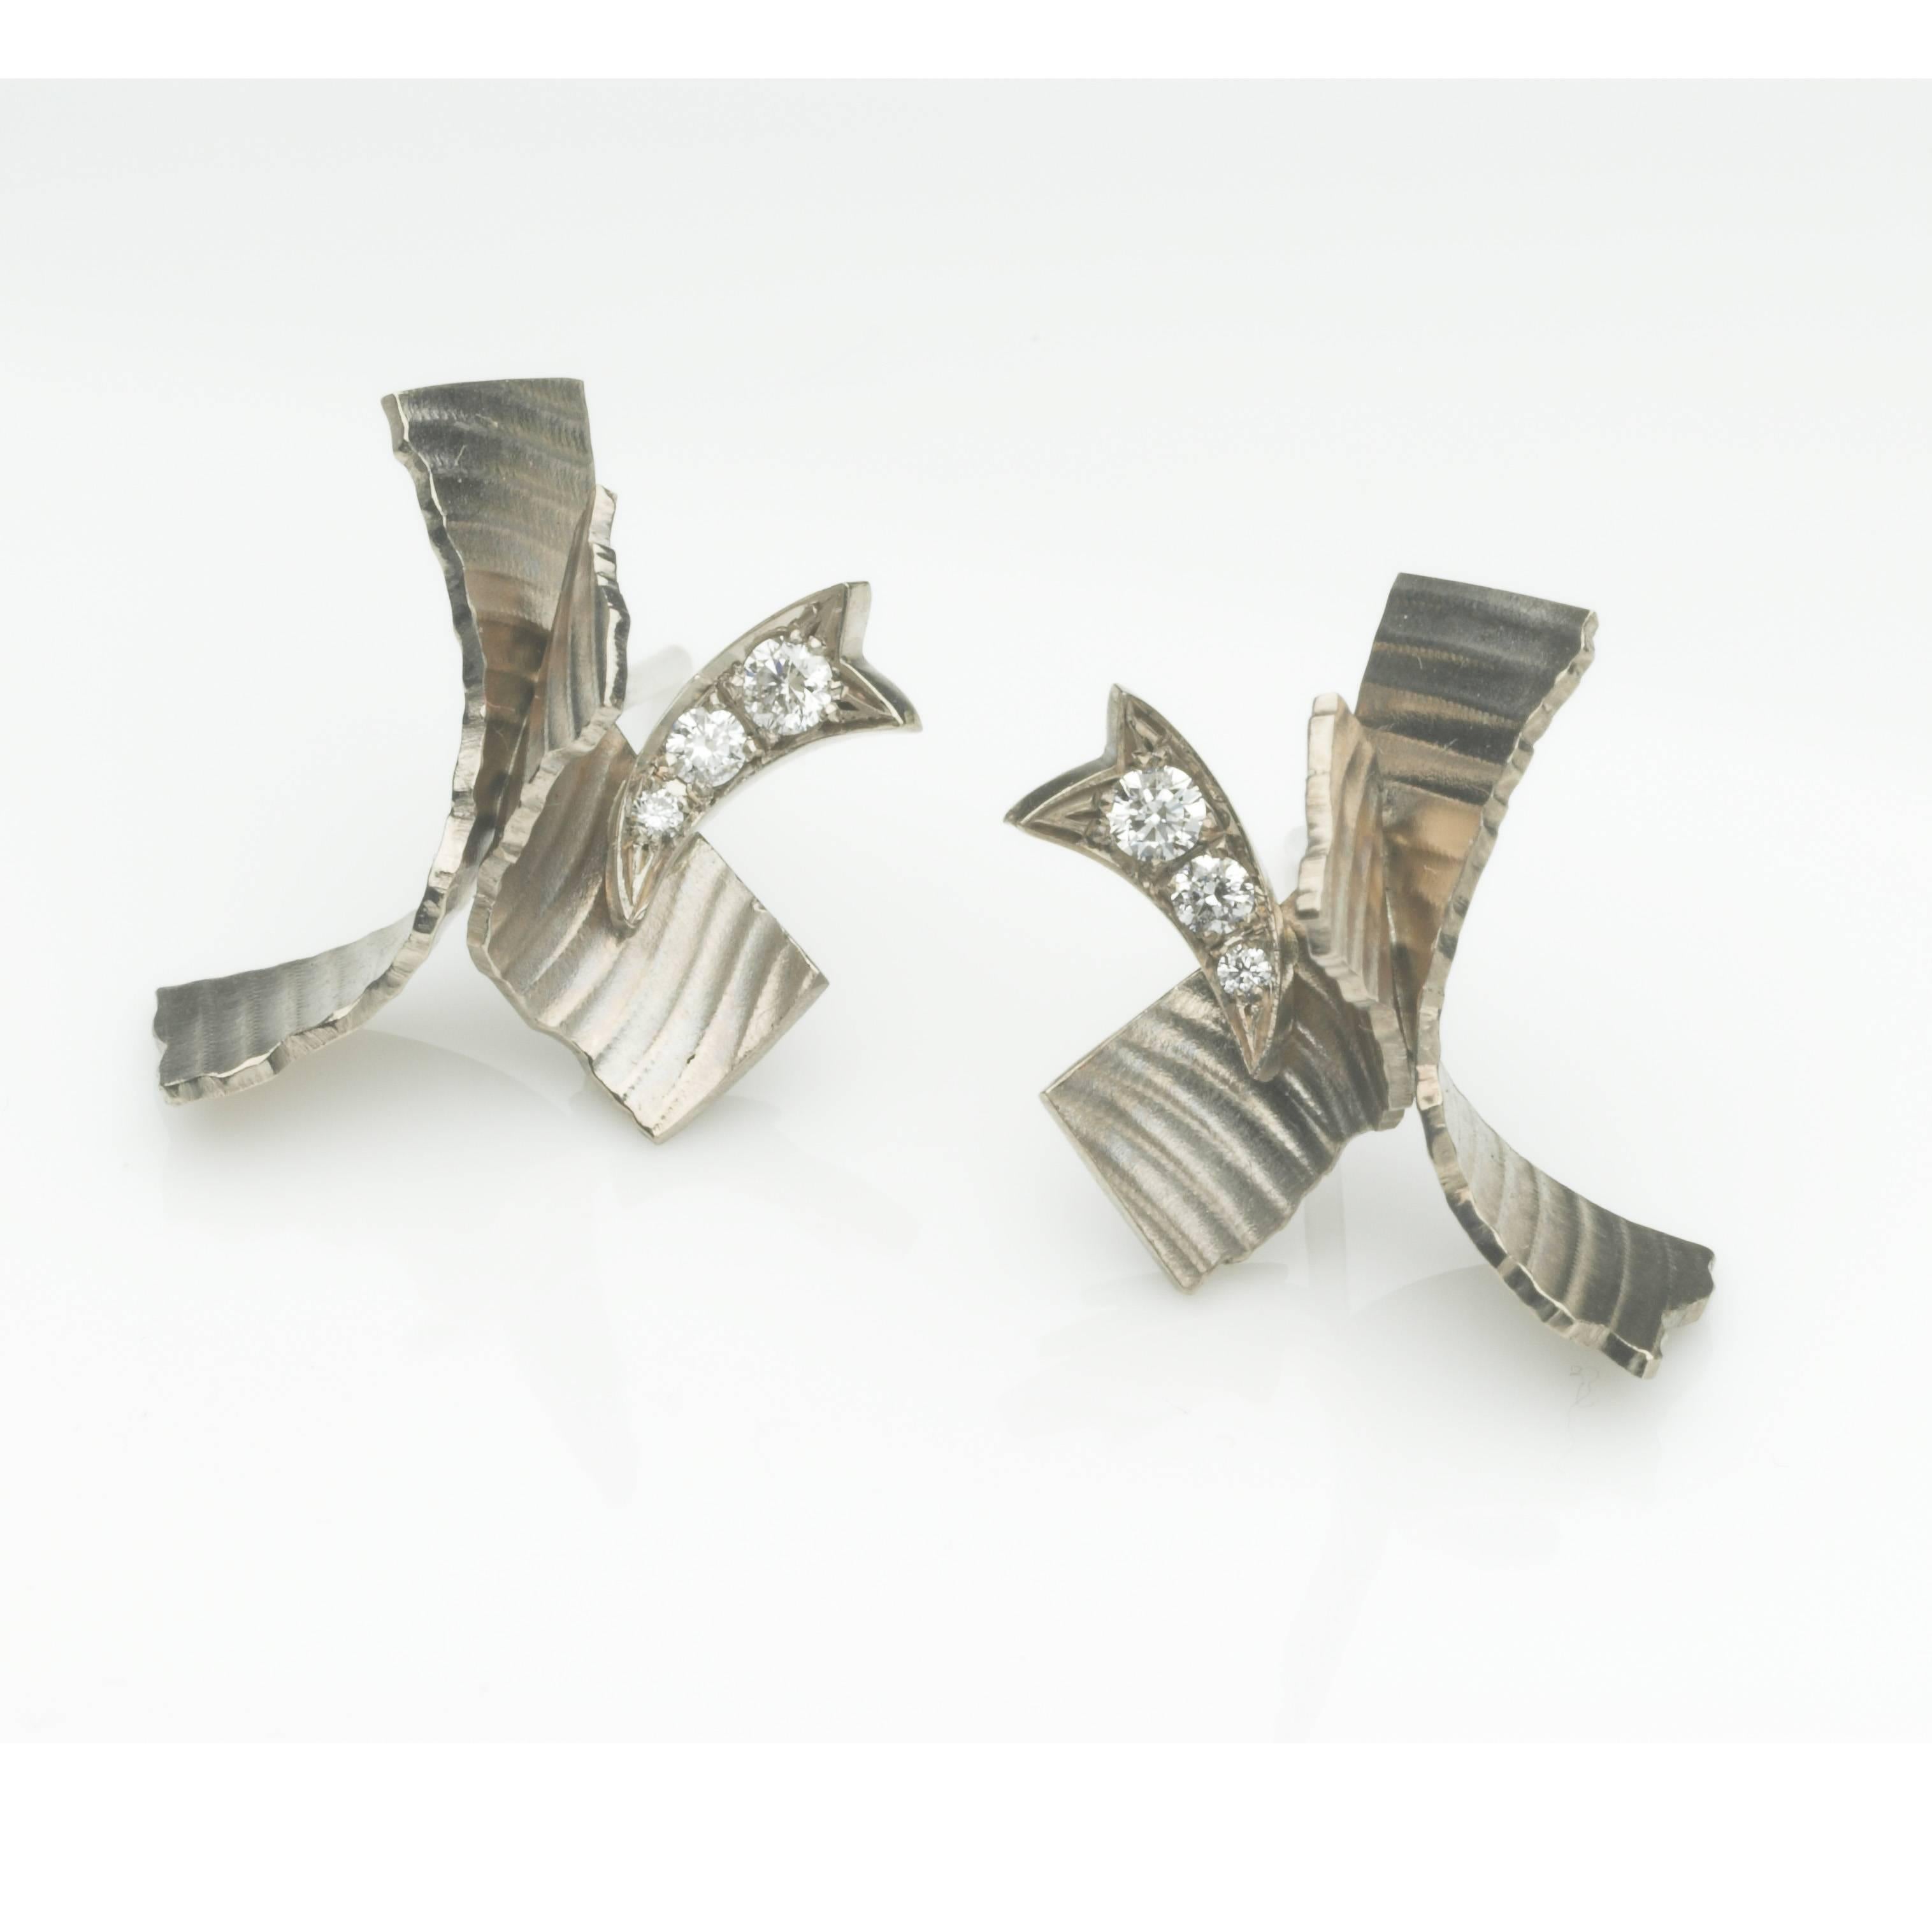 18ct white gold Mini Flutter earrings with a seductive ribbon texture, torn edges, and diamond flashes. The fittings are posts and scrolls.